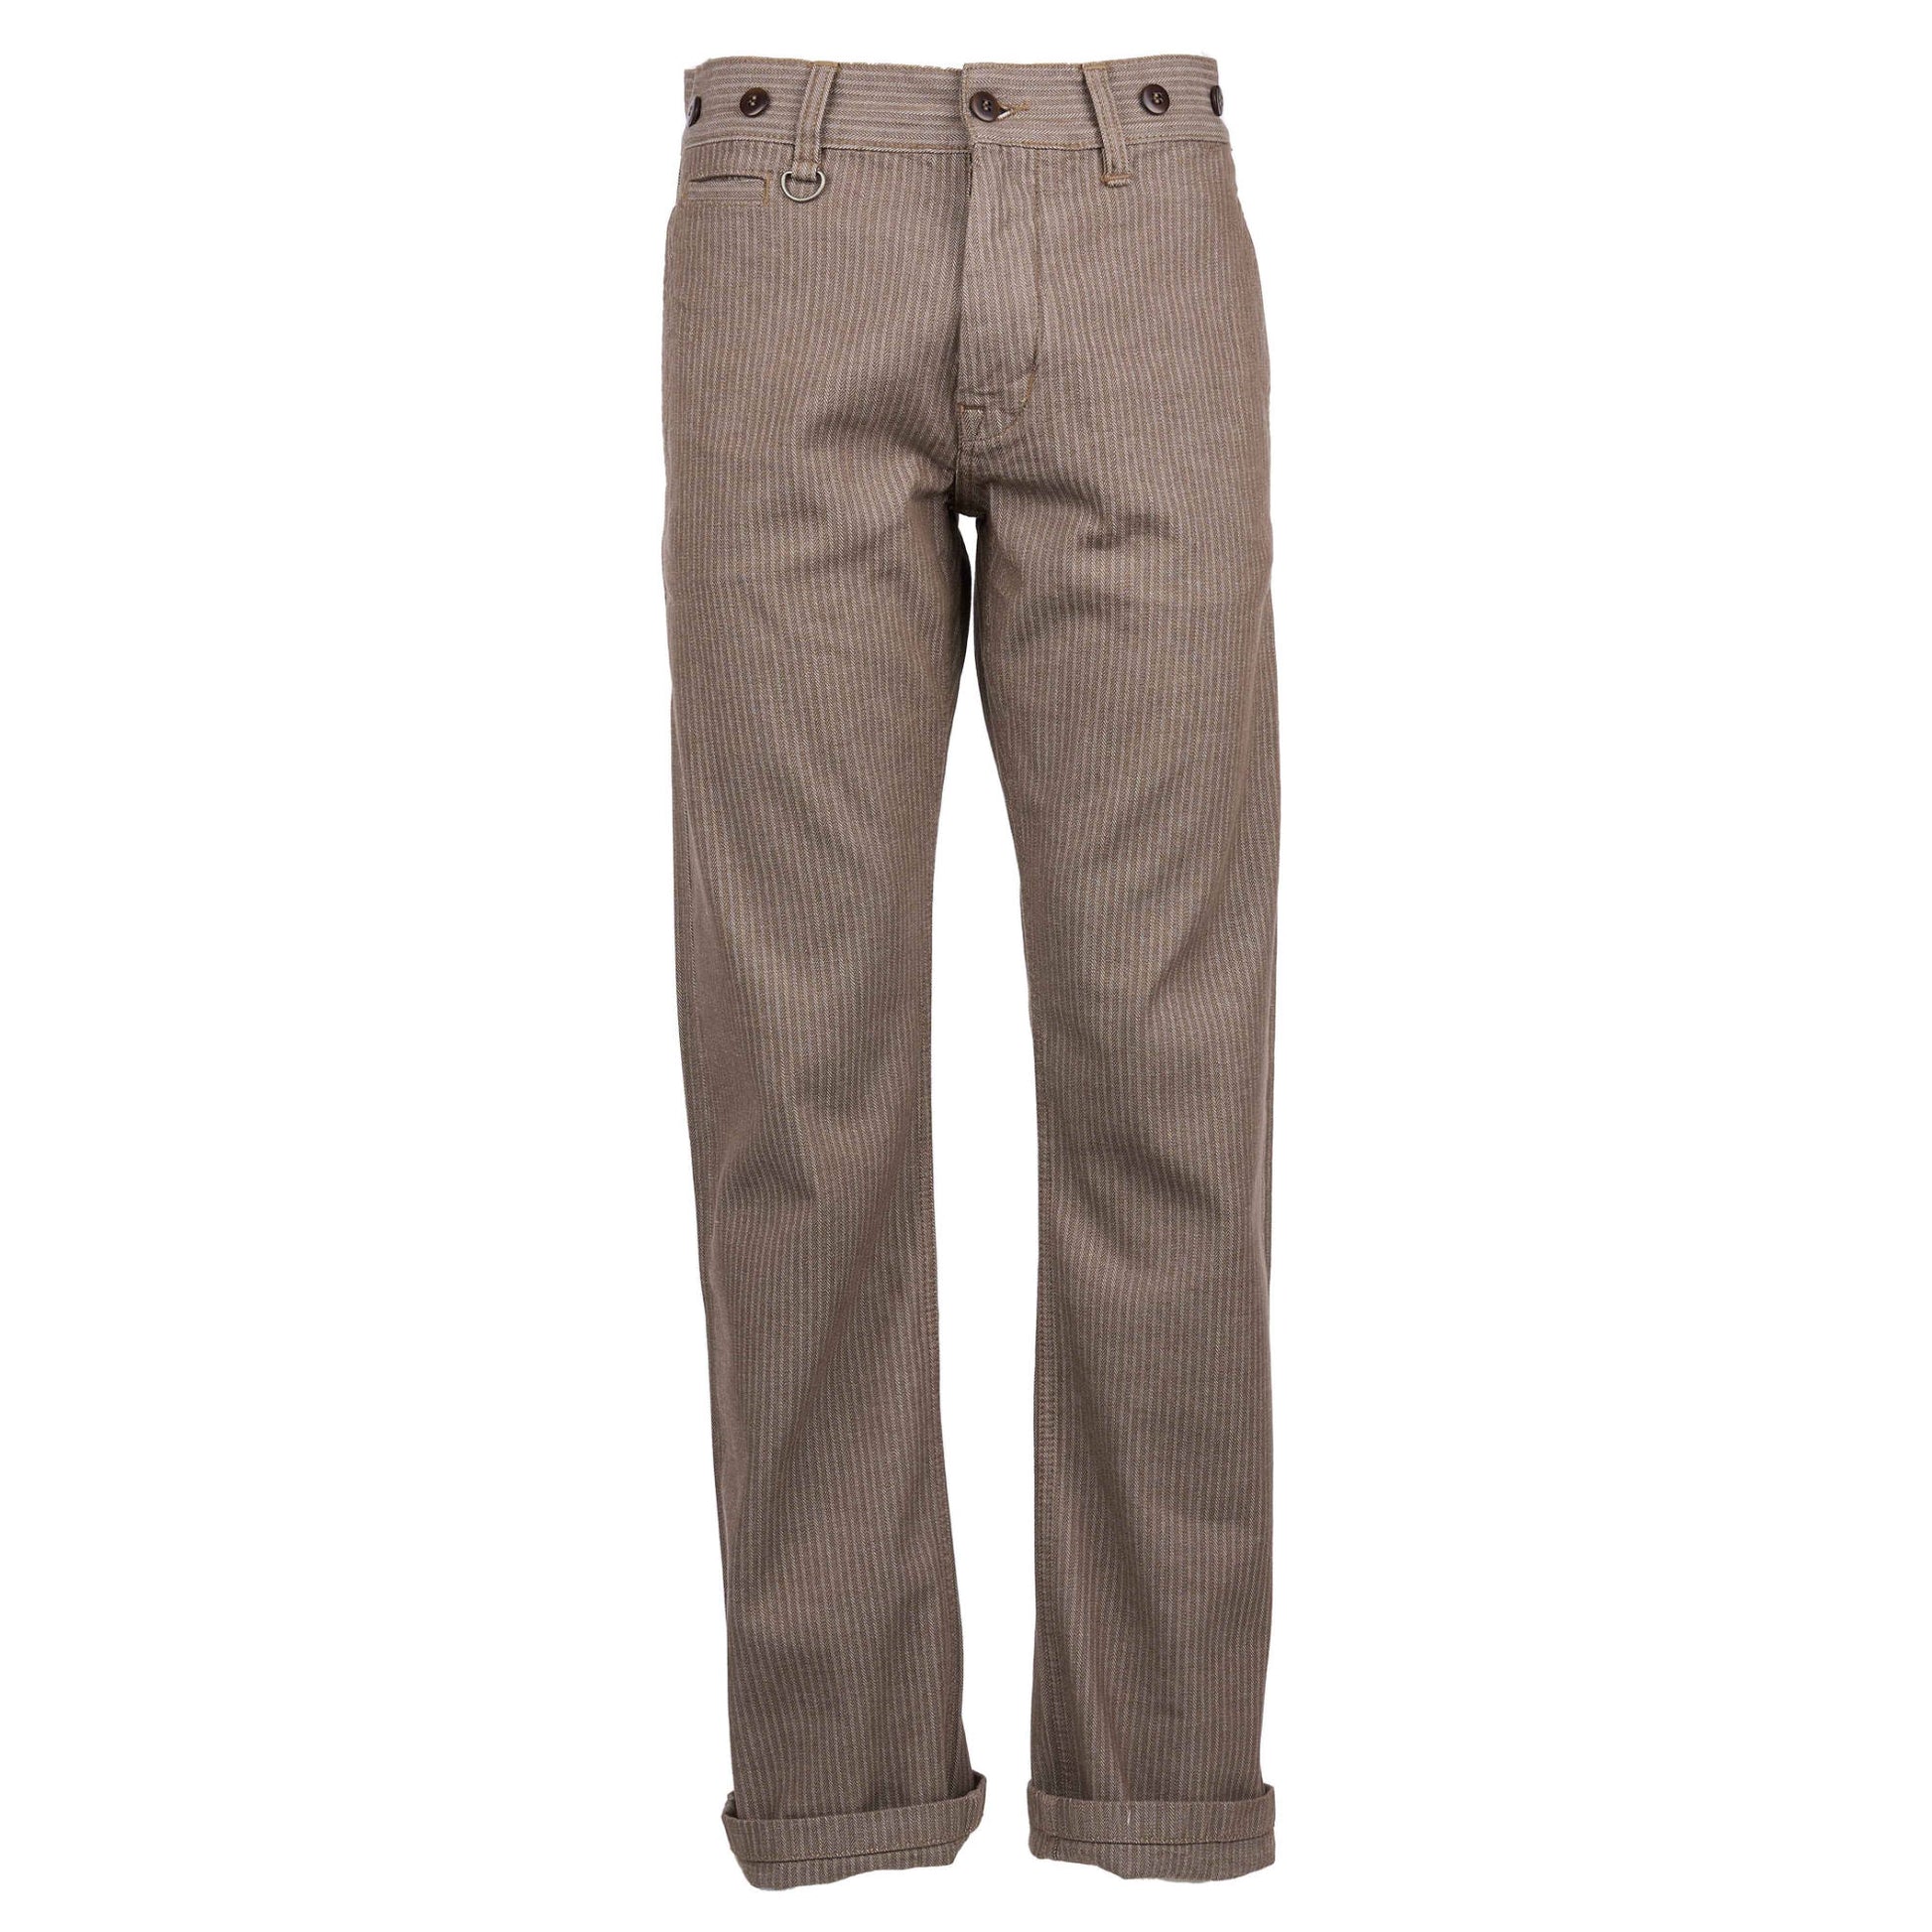 Pike Brothers 1942 Hunting Pant HBT Brown